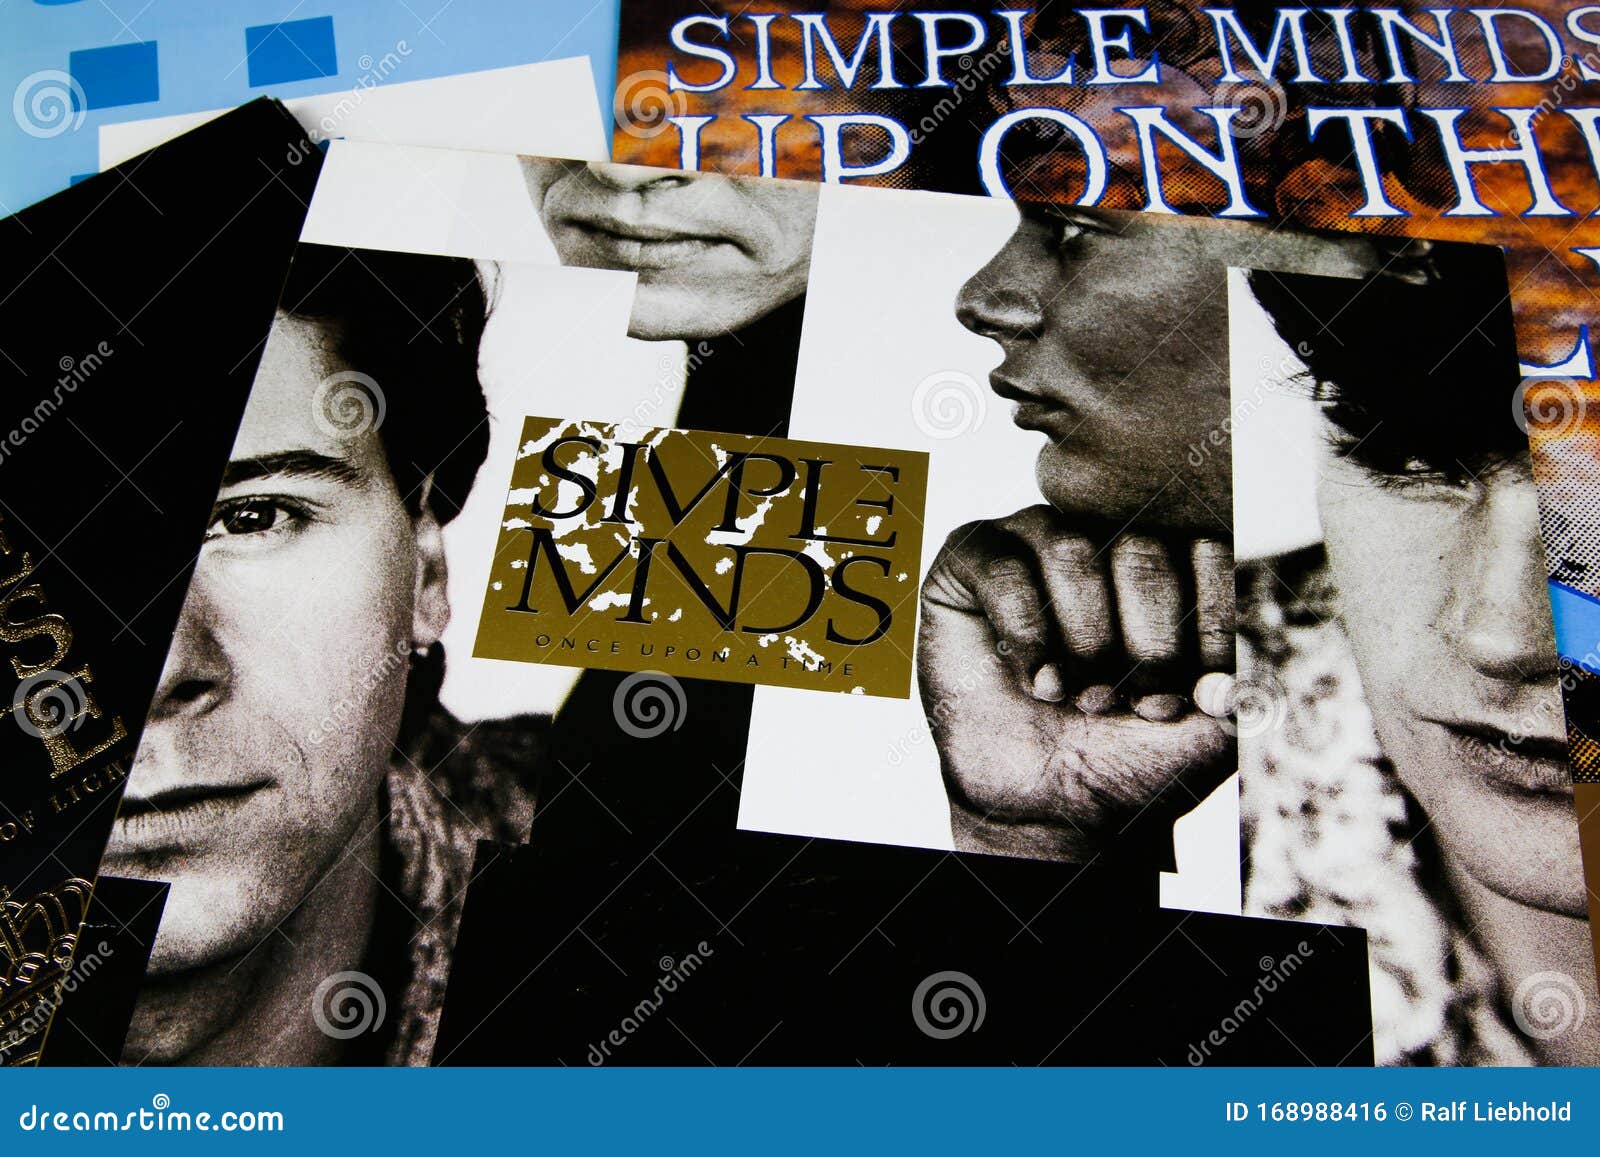 SIMPLE MINDS - REAL LIFE - NEW ALBUM PROMOTIONAL POSTER